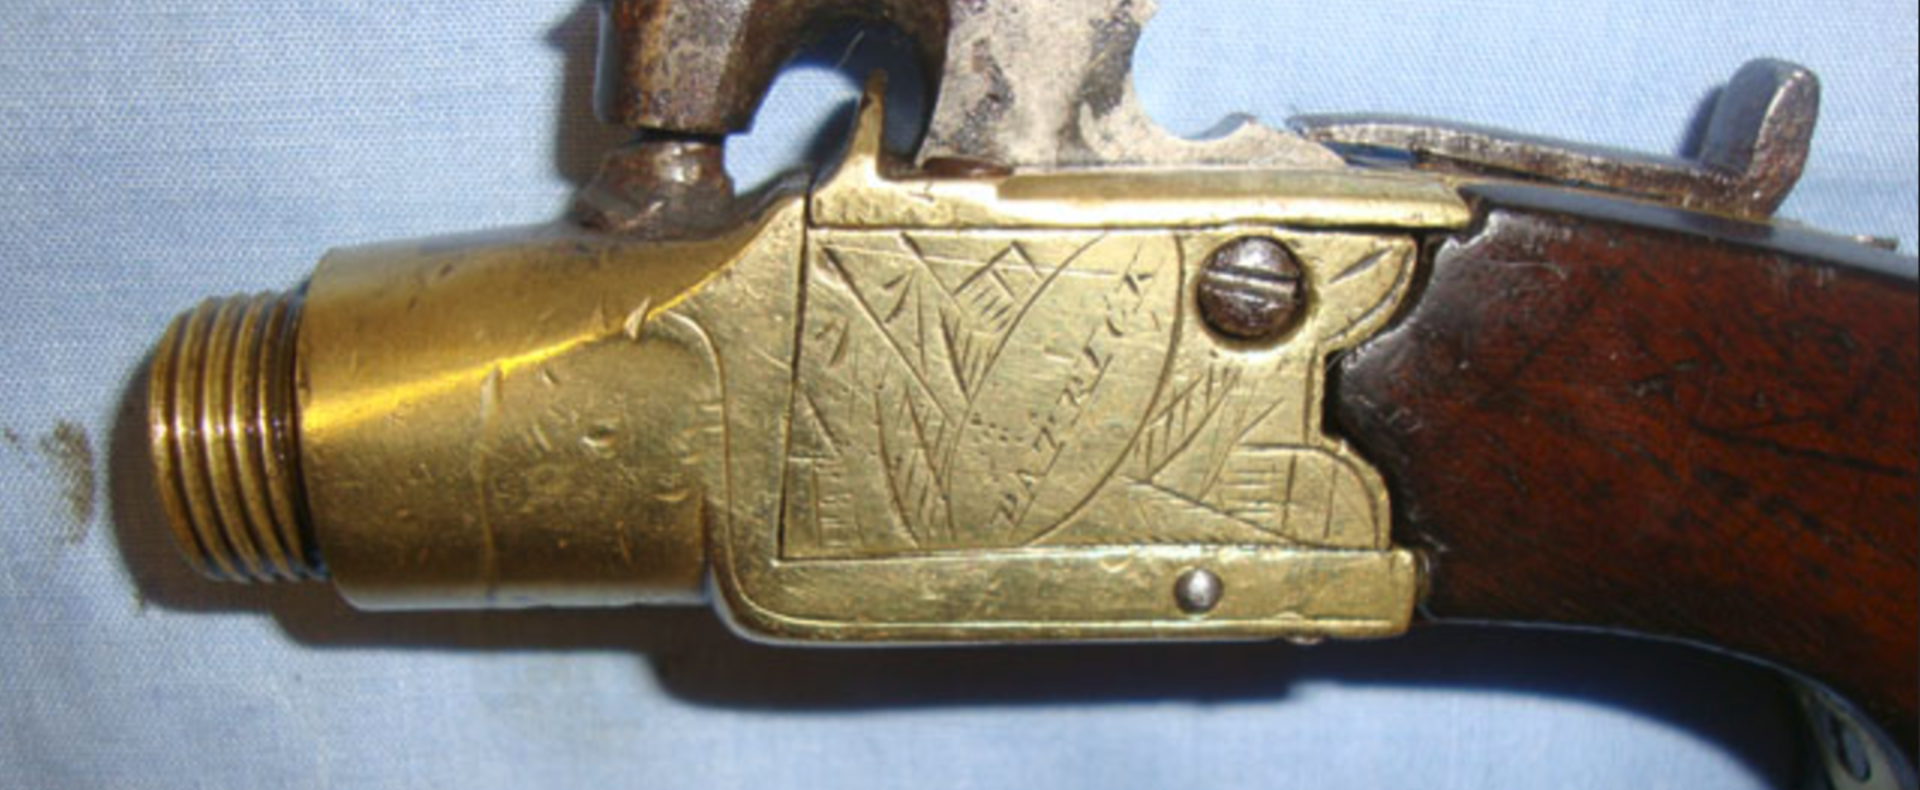 1795-1832 English, .44" Bore, Brass Framed Percussion Pocket Pistol With Screw Off Barrel - Image 2 of 3